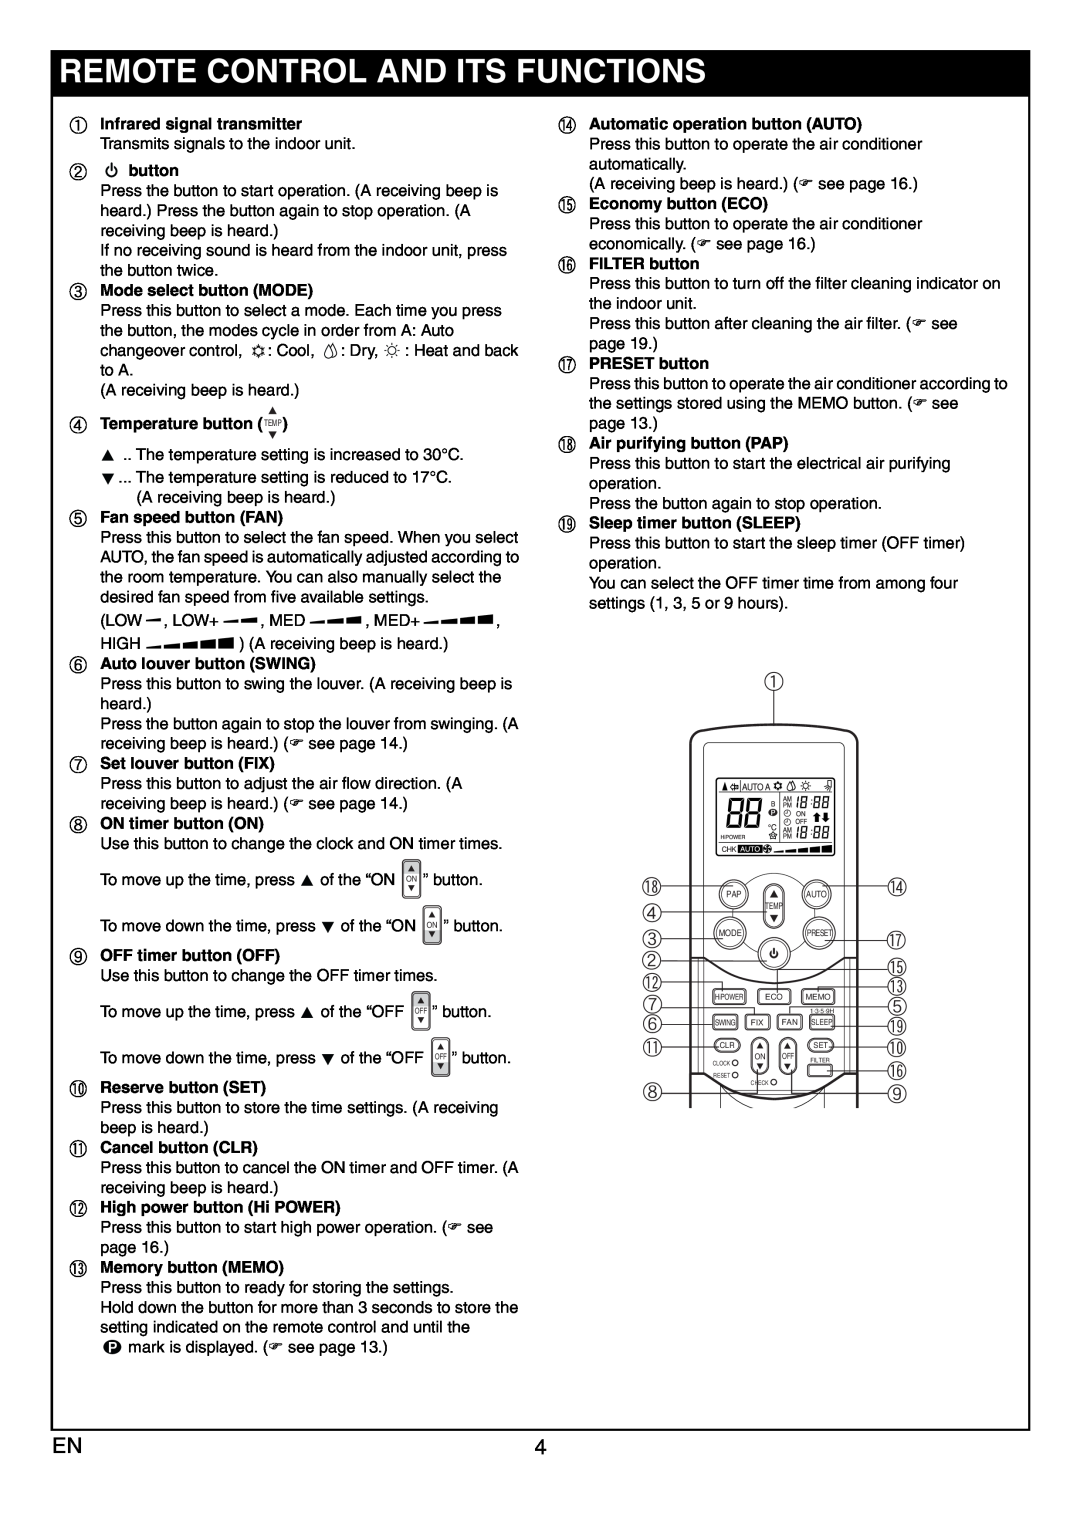 Toshiba RAS-13JKVP-E, RAS-13JAVP-E, RAS-10JKVP-E, RAS-10JAVP-E owner manual Remote Control And Its Functions 